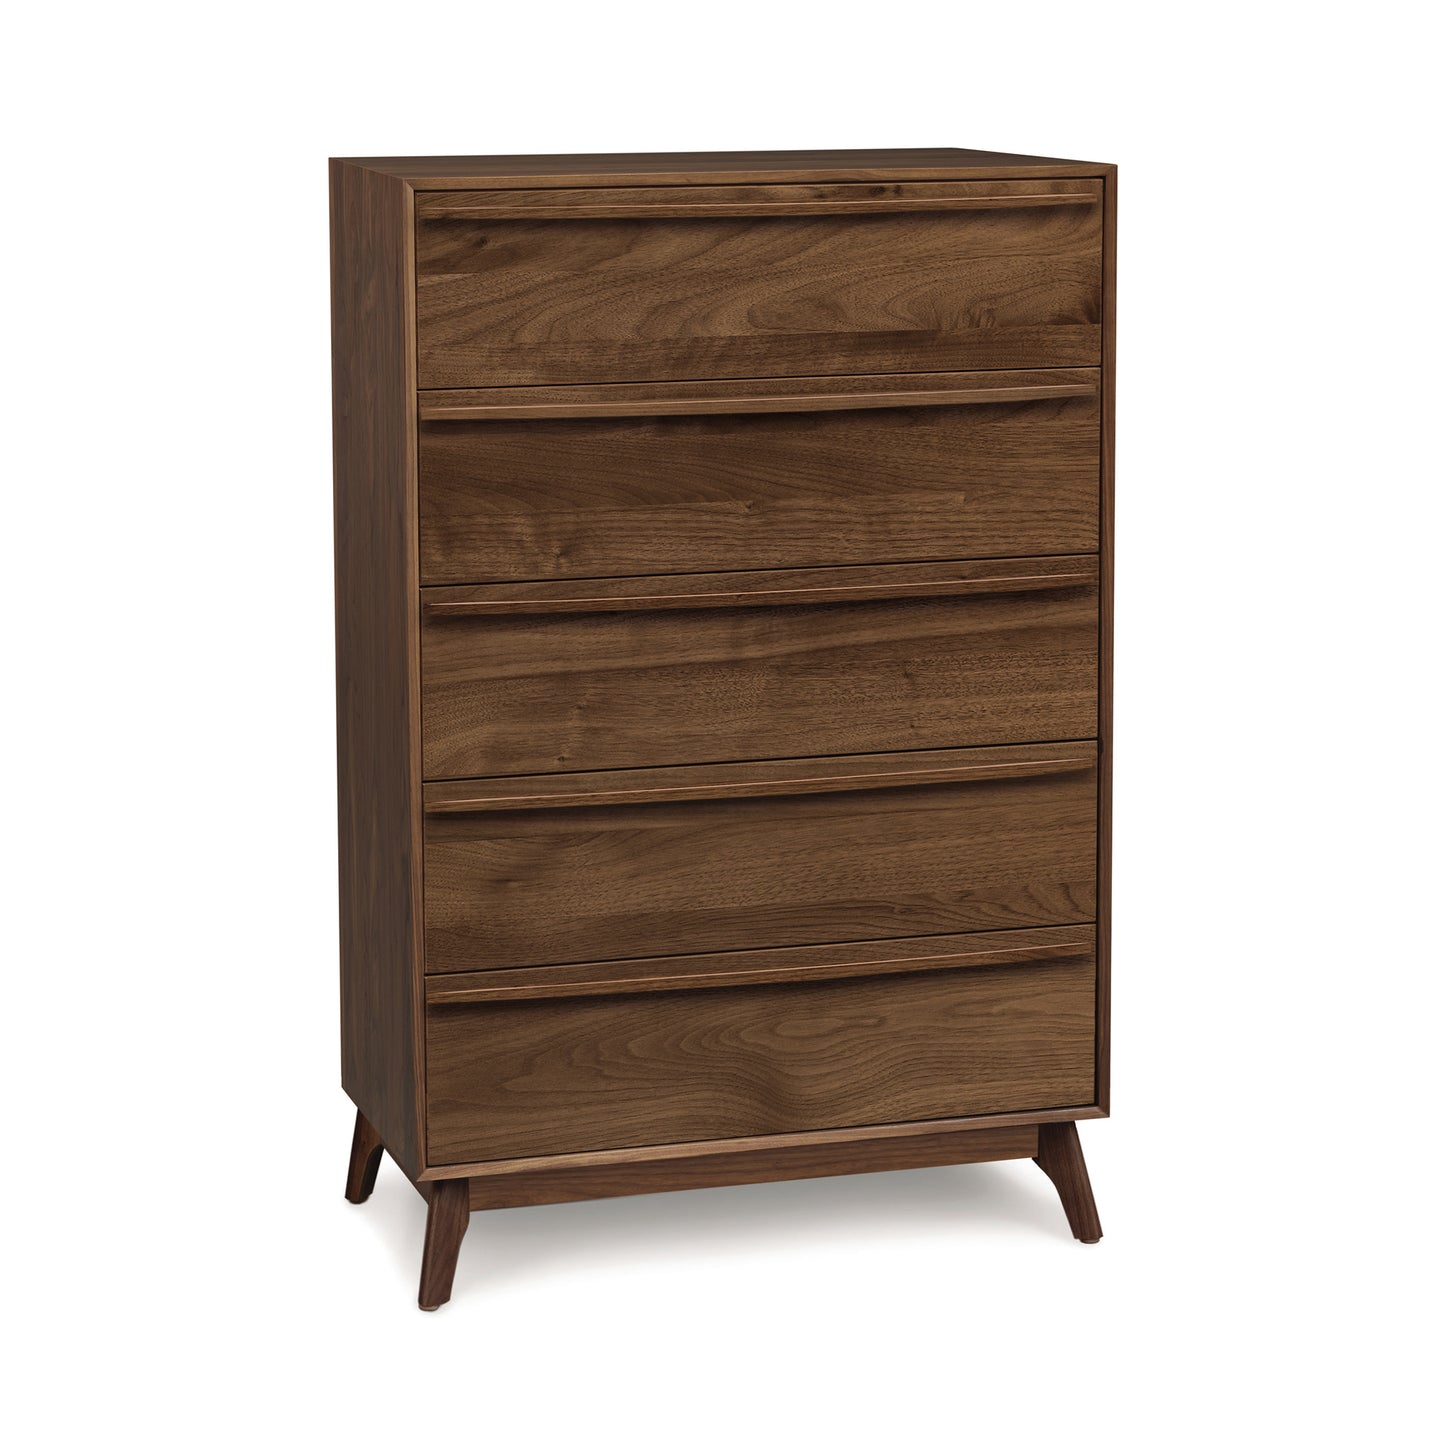 A modern wooden Catalina 5-Drawer Wide Chest, part of the Copeland Furniture Bedroom Furniture Collection, with five visible pull-out compartments, set against a white background.